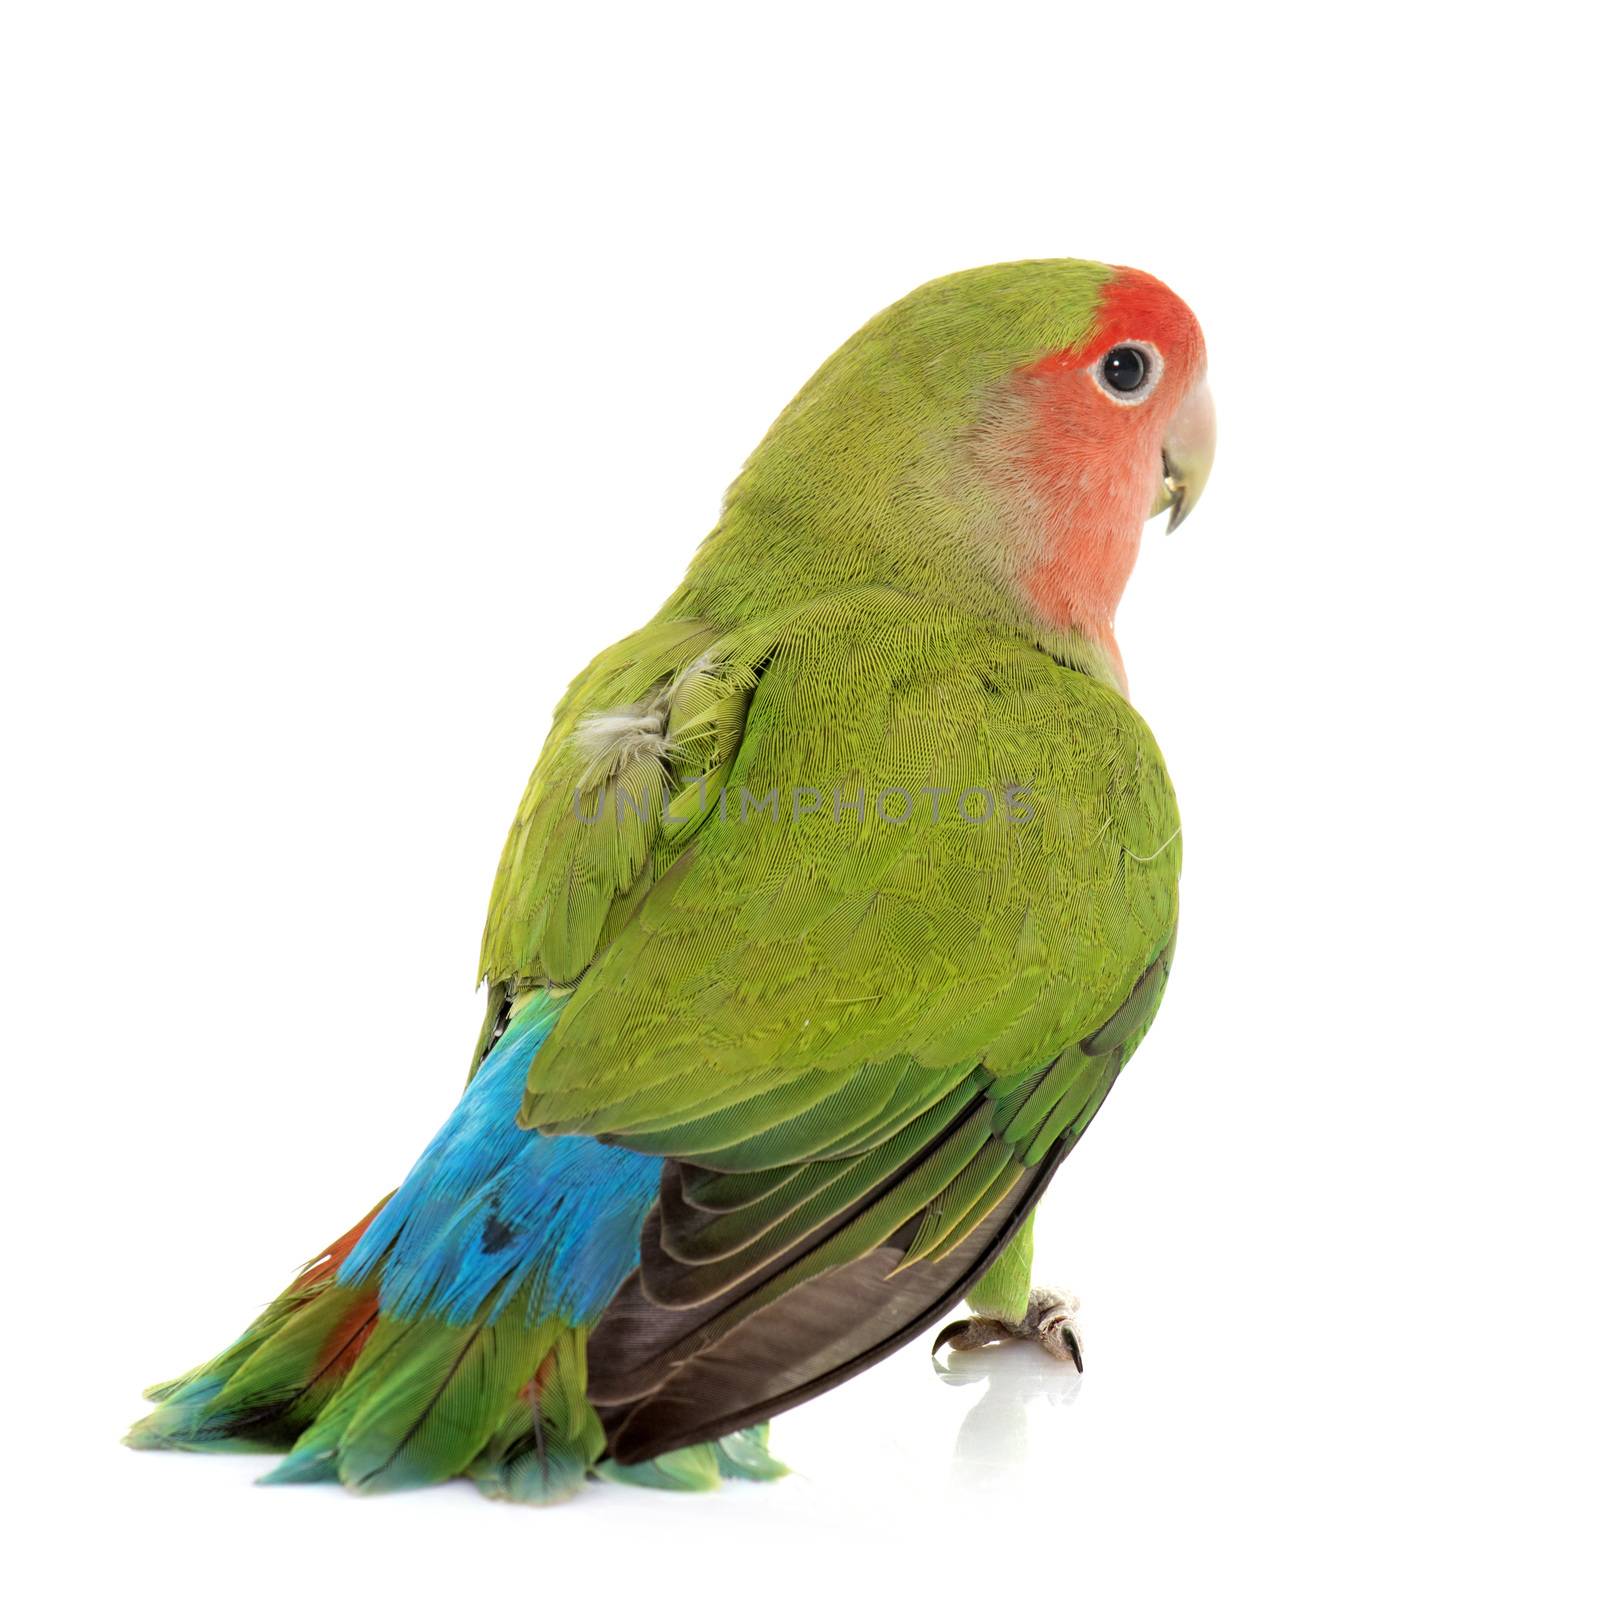 Peach-faced Lovebird in front of white background